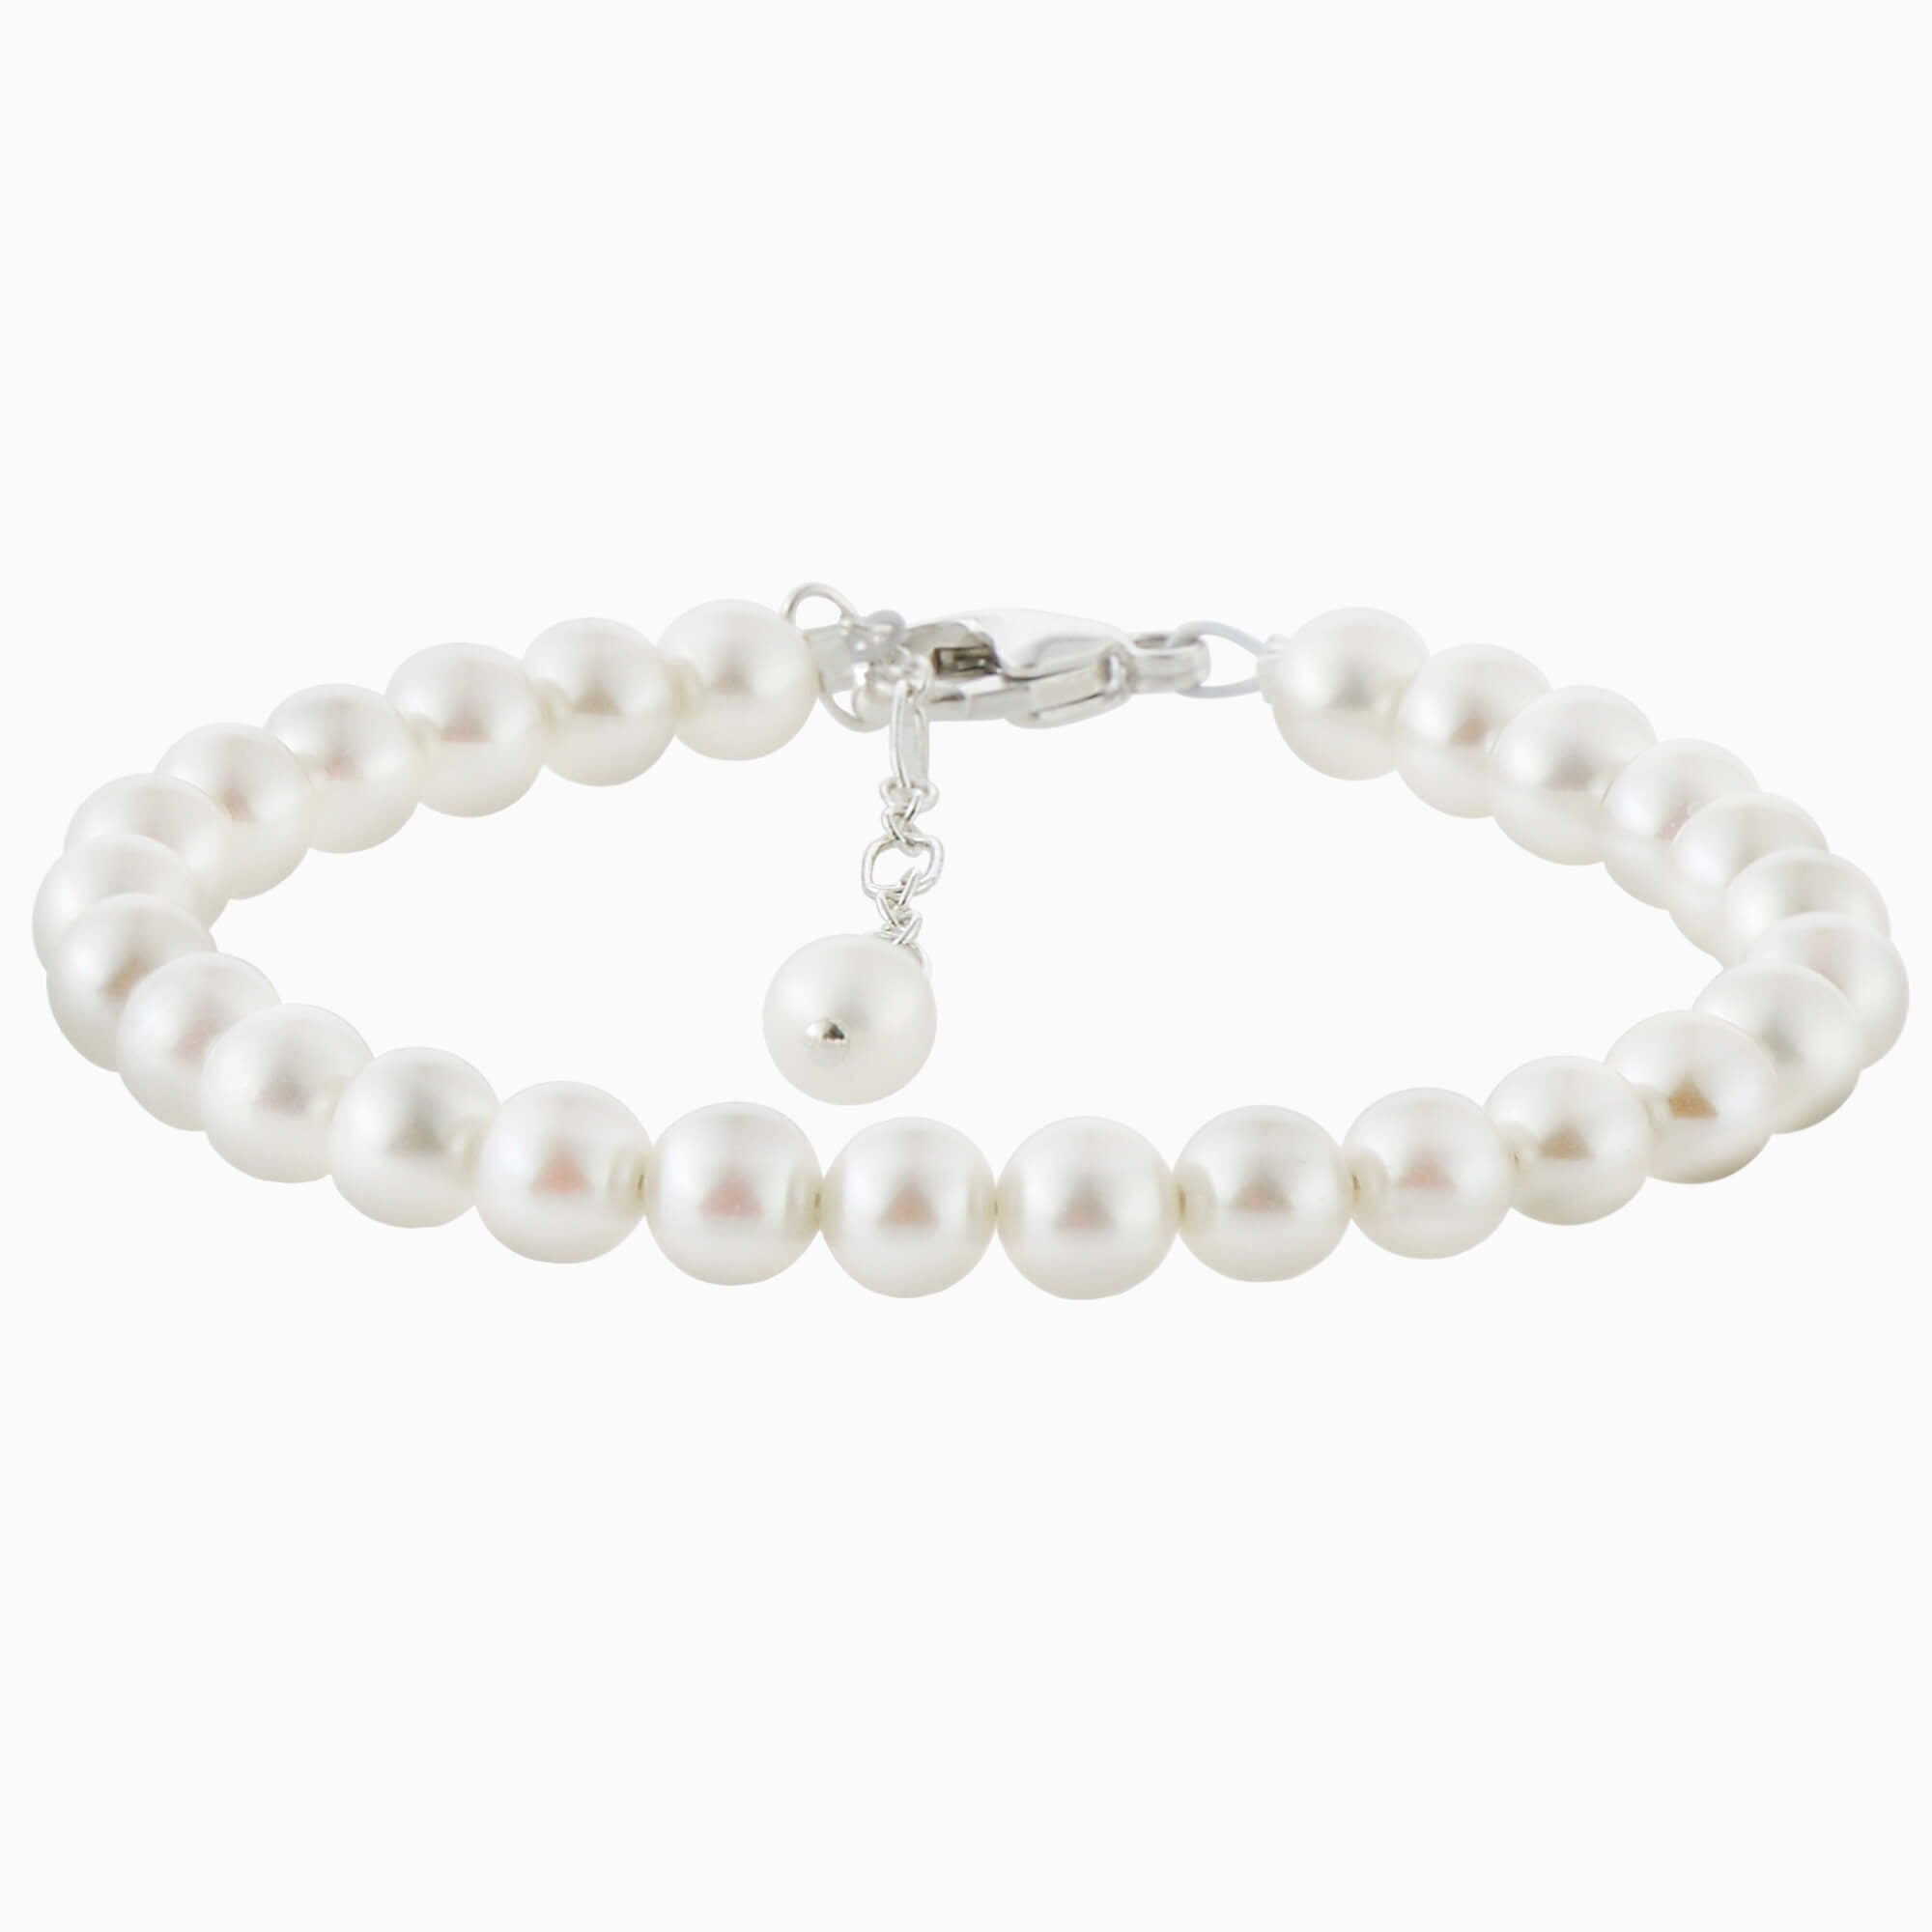 Innocence Pearl Bracelet for girls with two color options and personalized  engraved bead